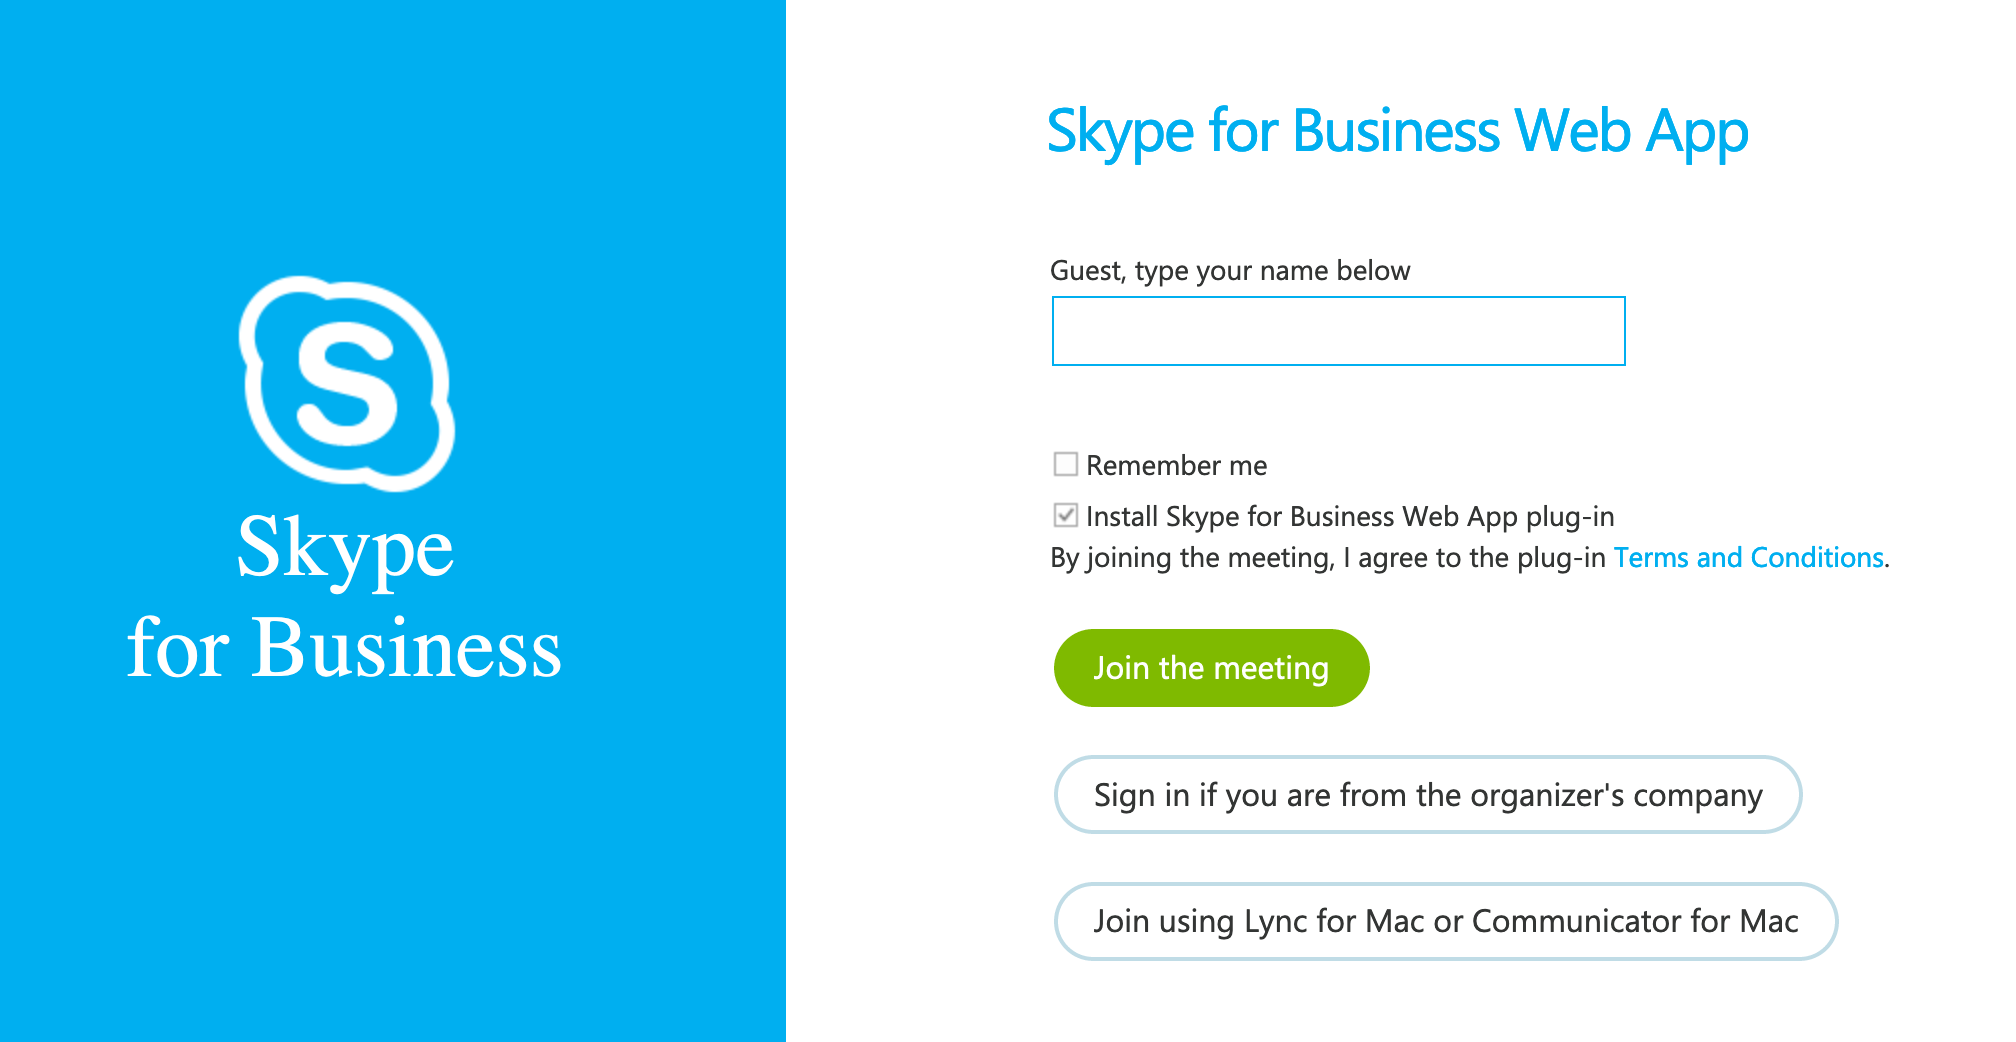 is there a skype for business mac client